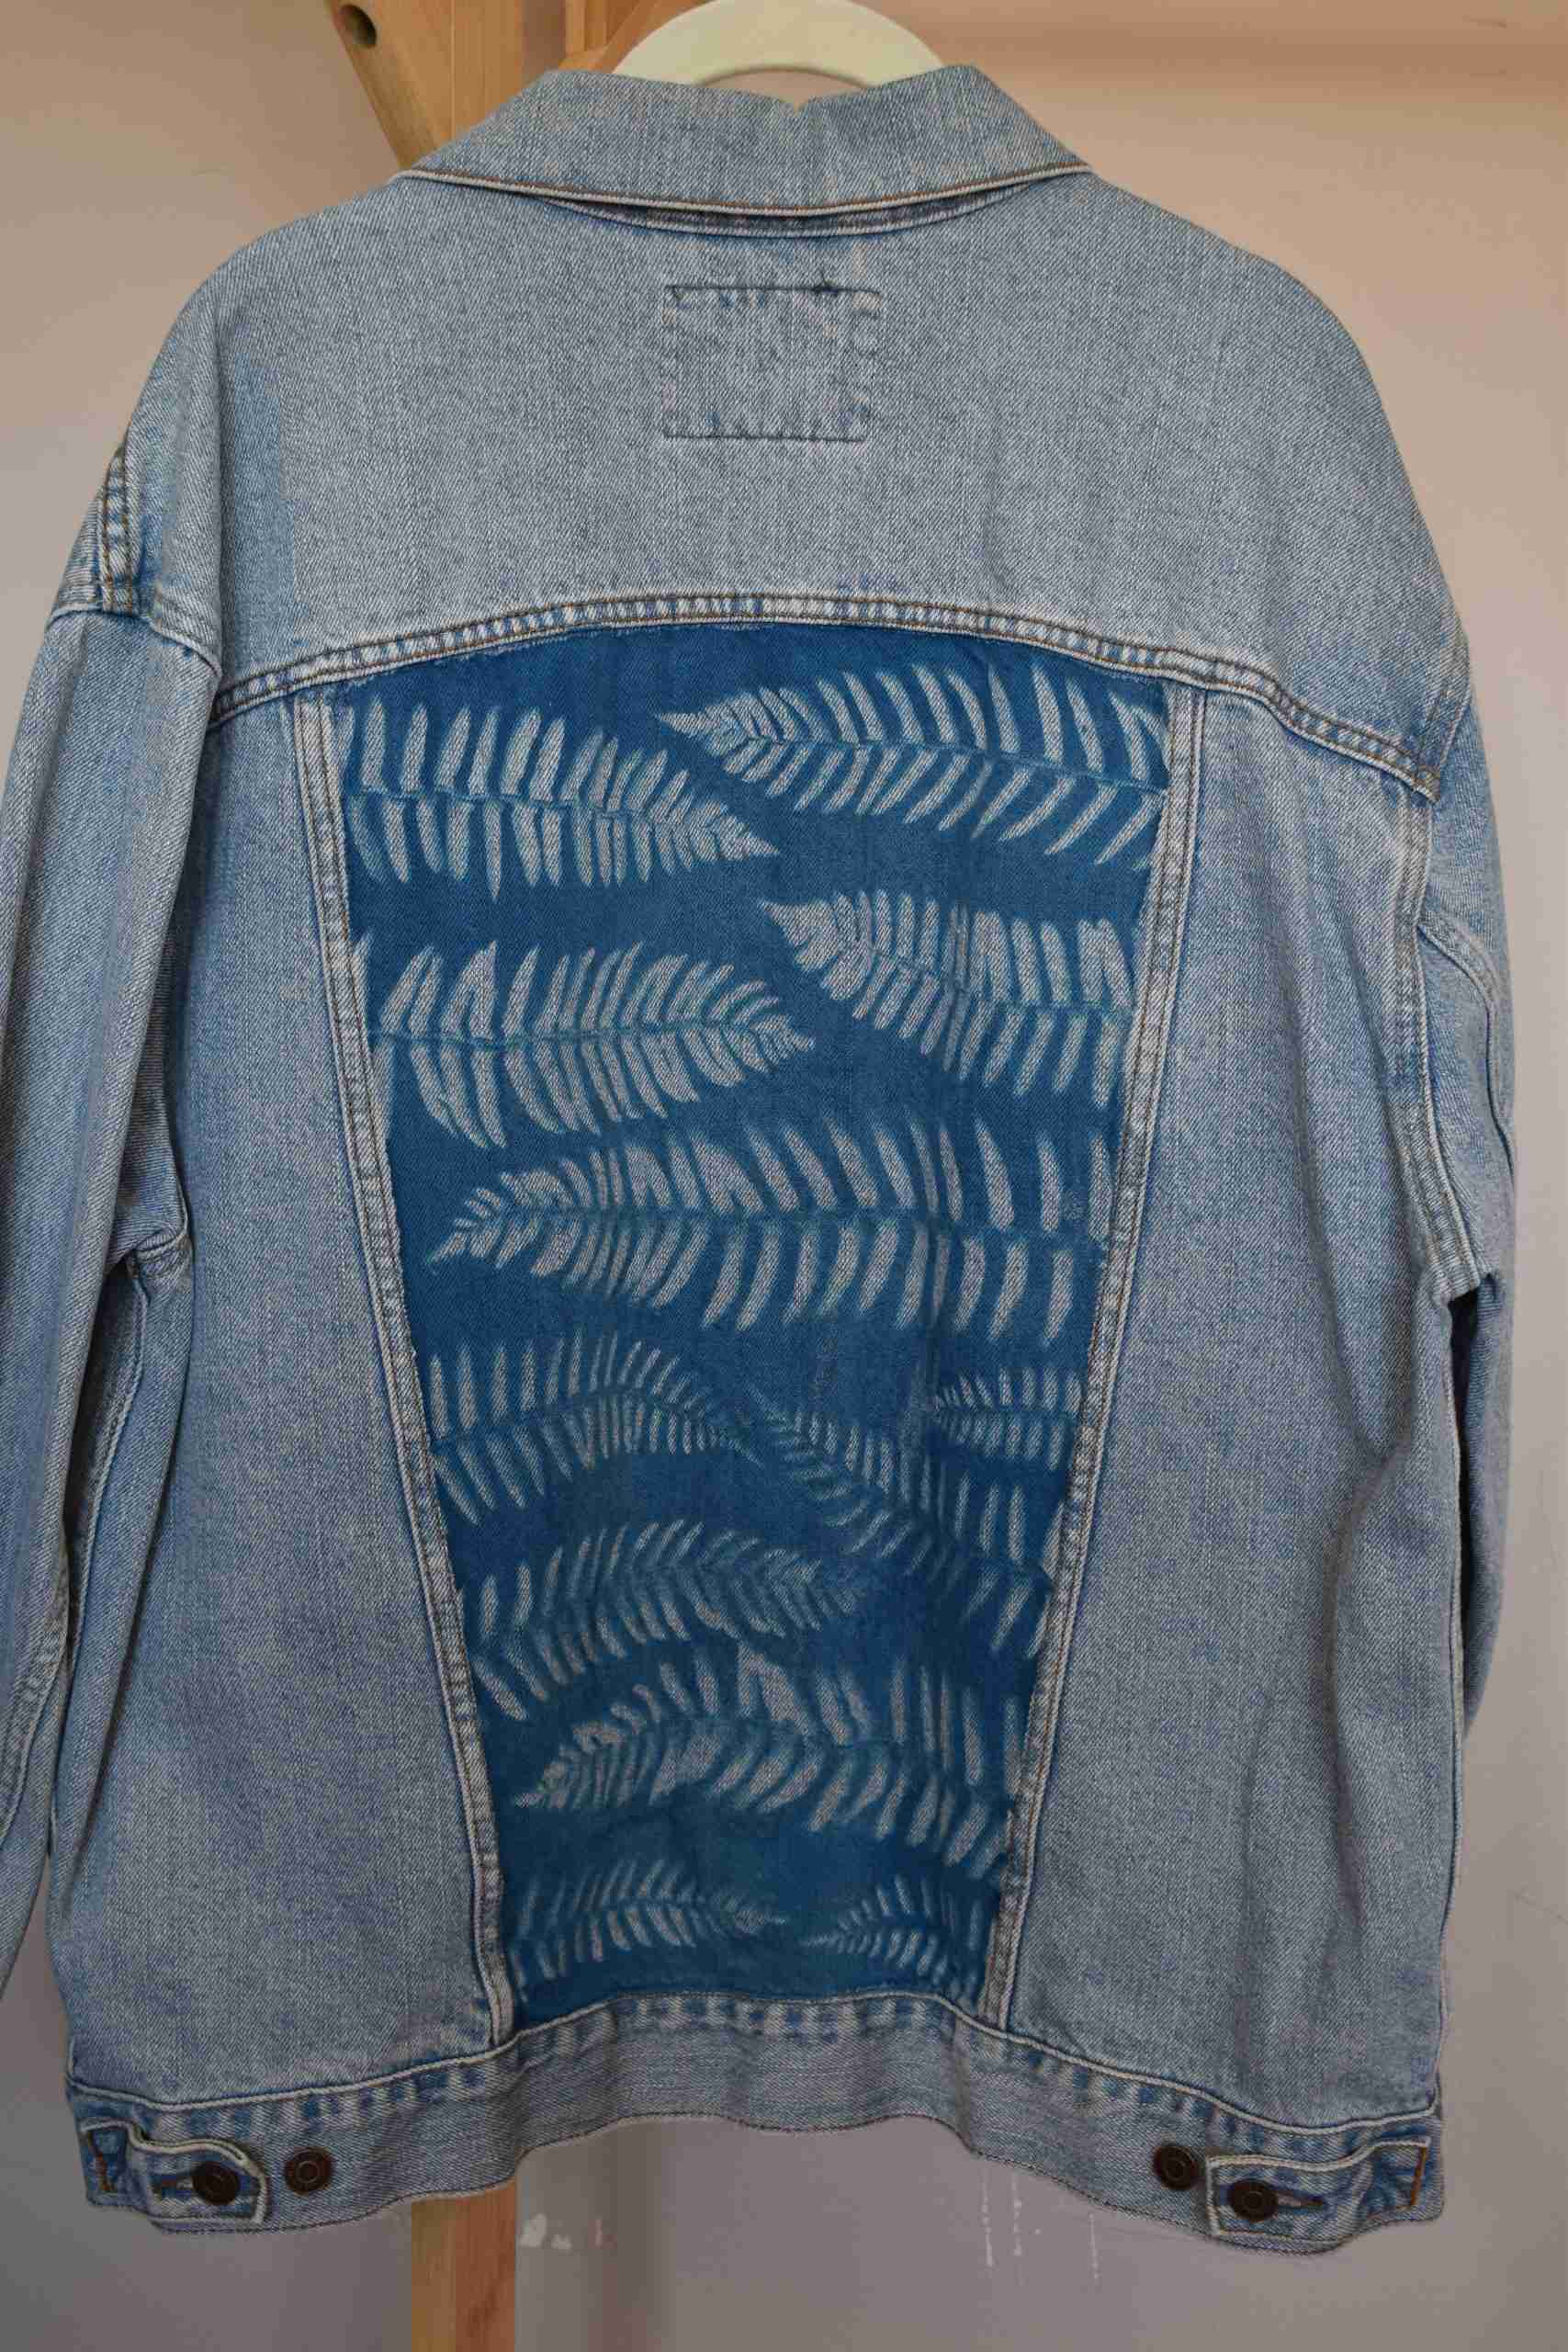 a denim jacket with a blue design on it.